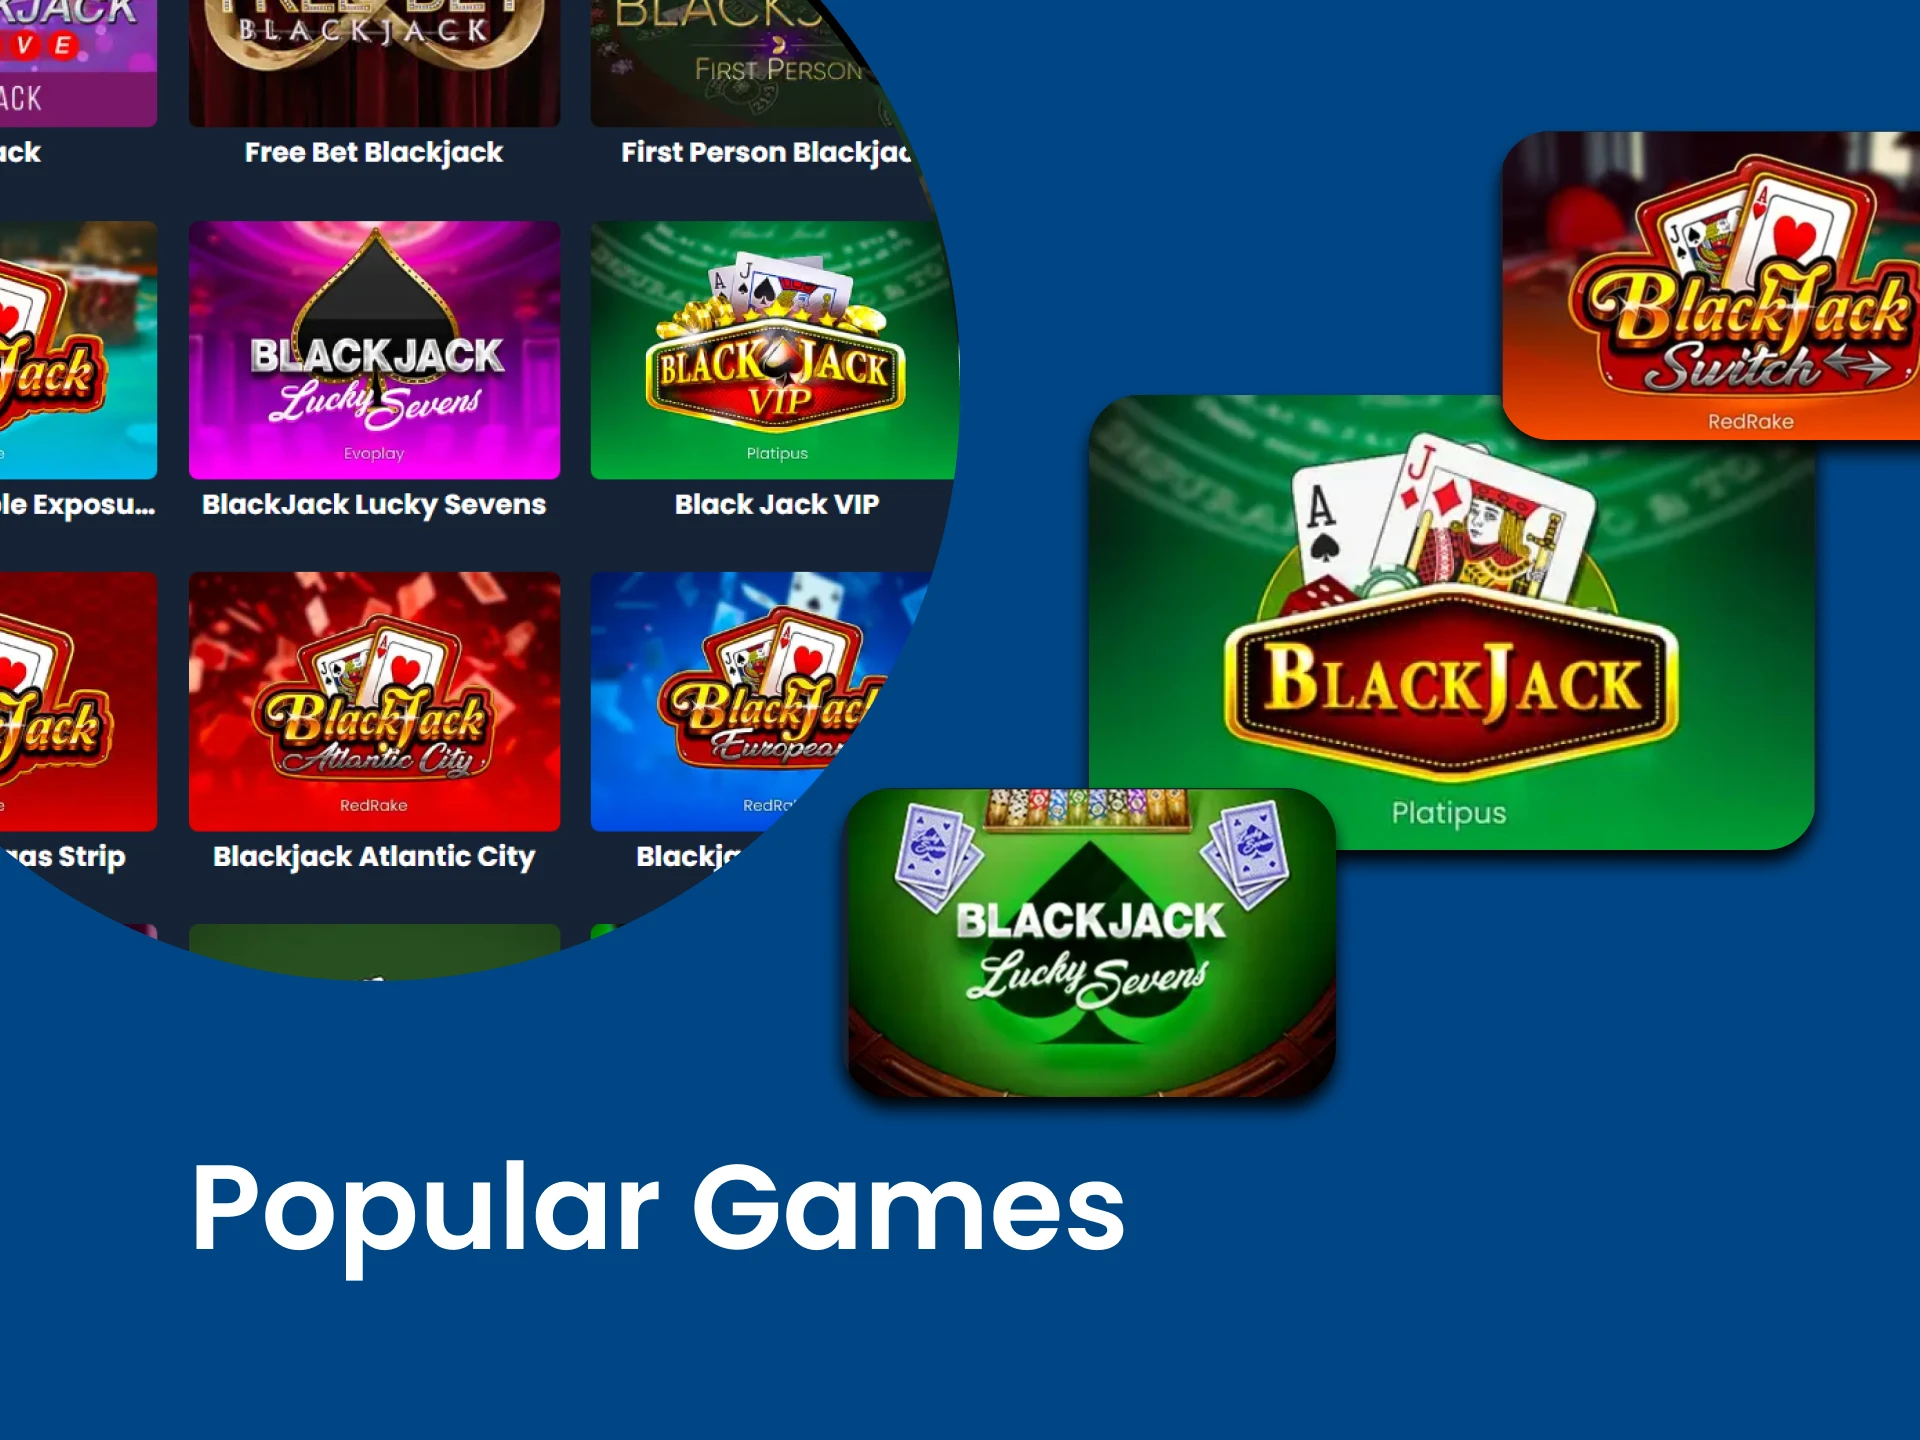 We will tell you which types of blackjack are the best.